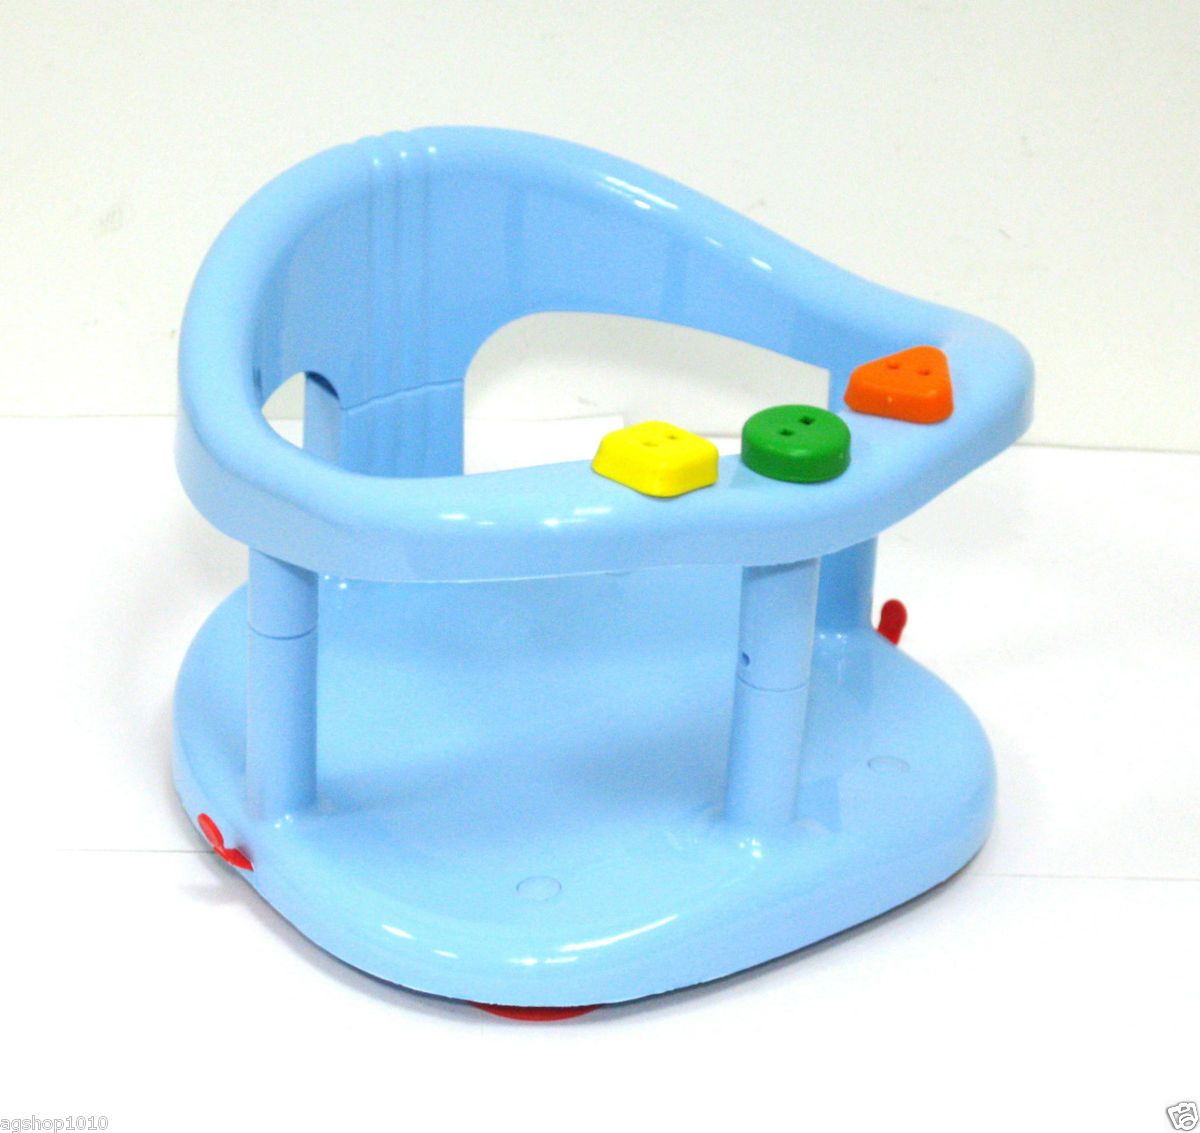 New Baby Bath Tub Ring Seat by Keter Blue Color